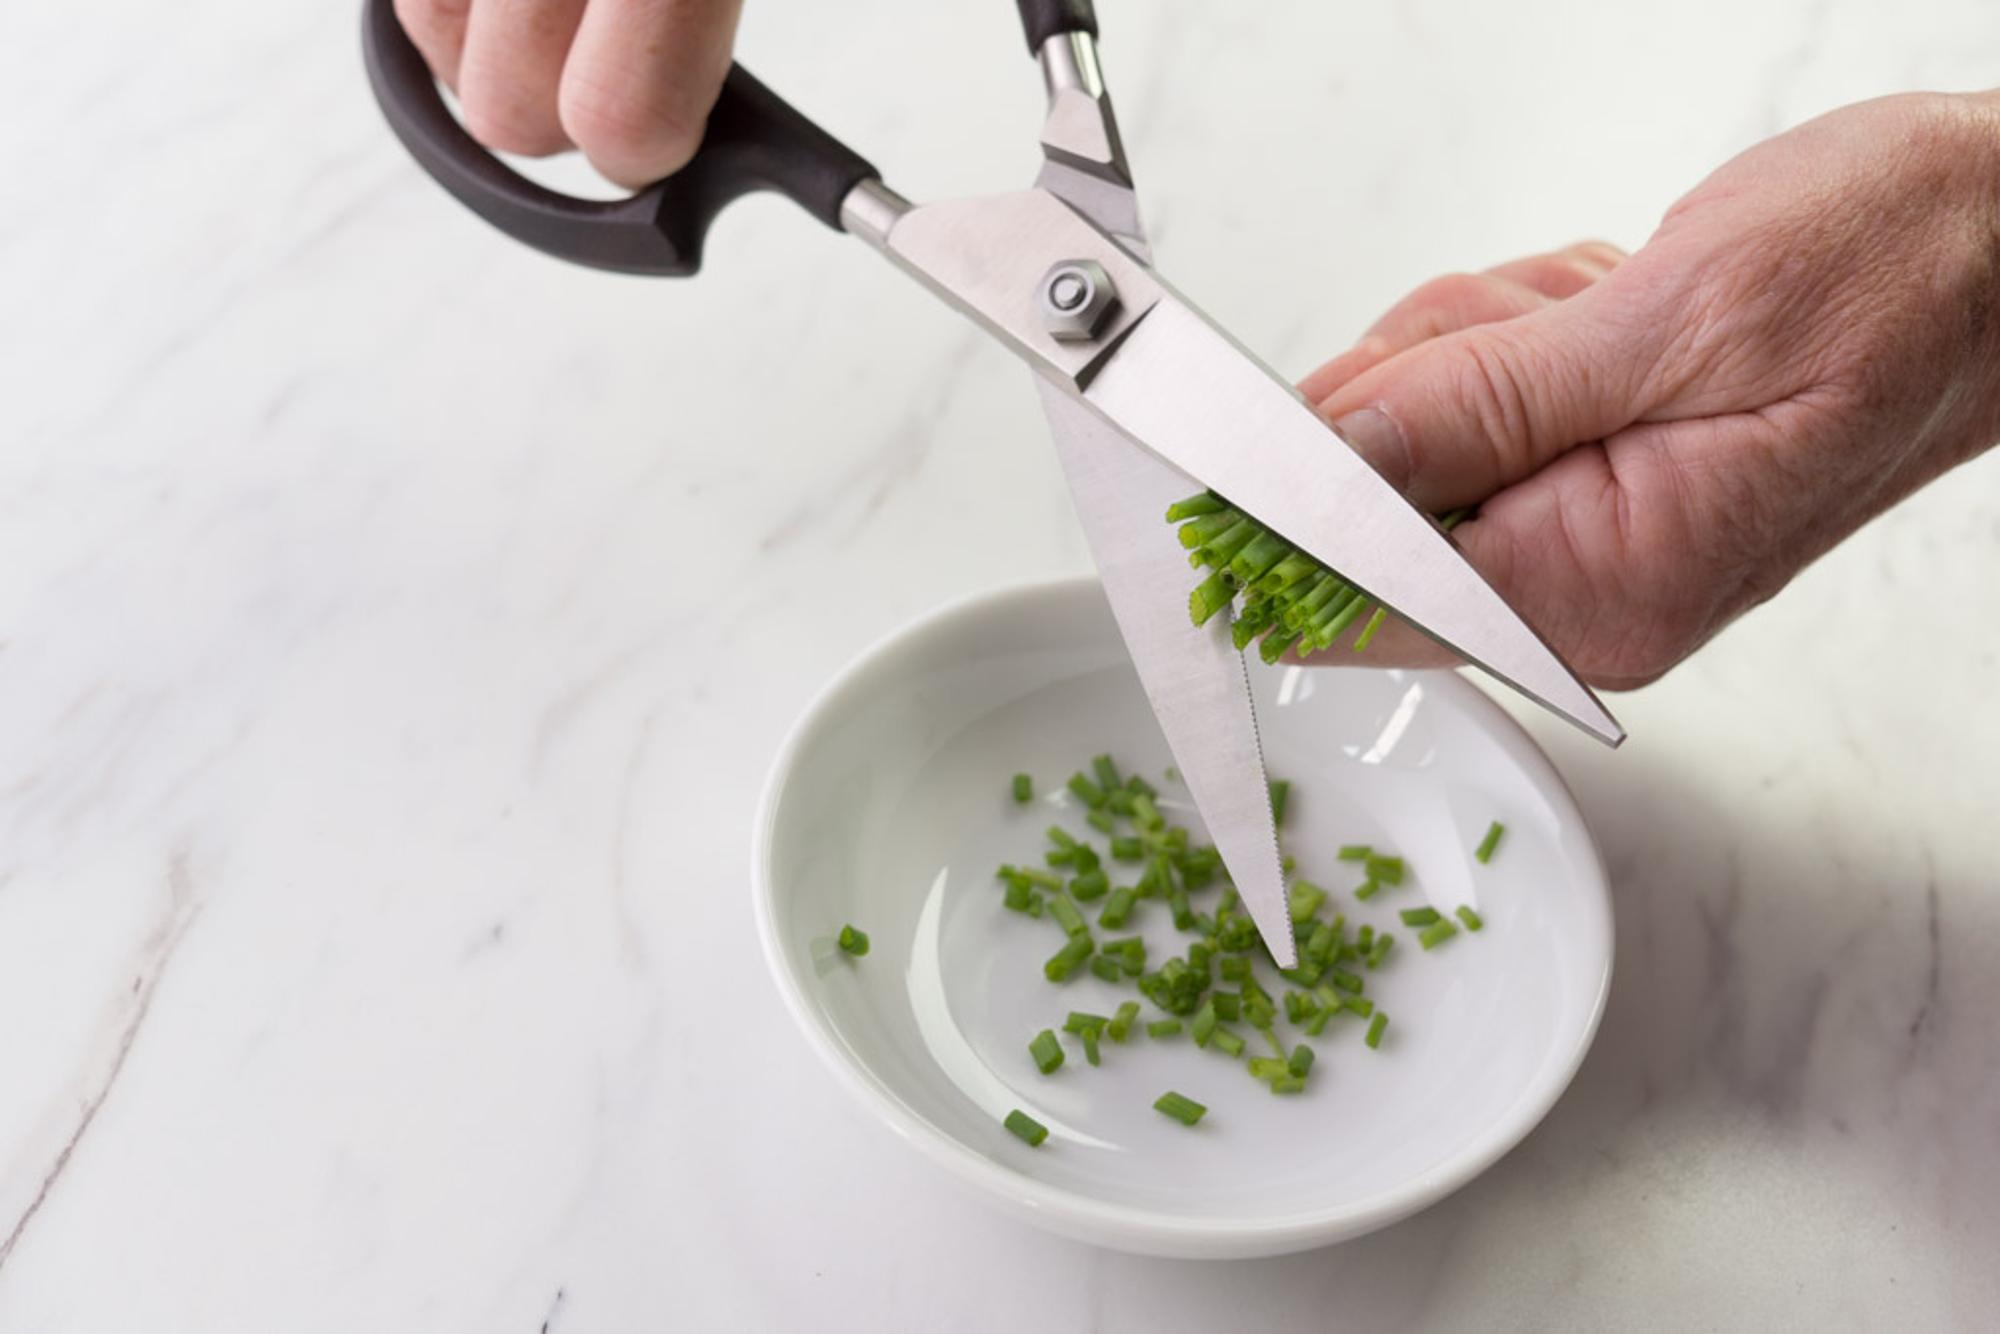 Using Super Shears to snip chives.